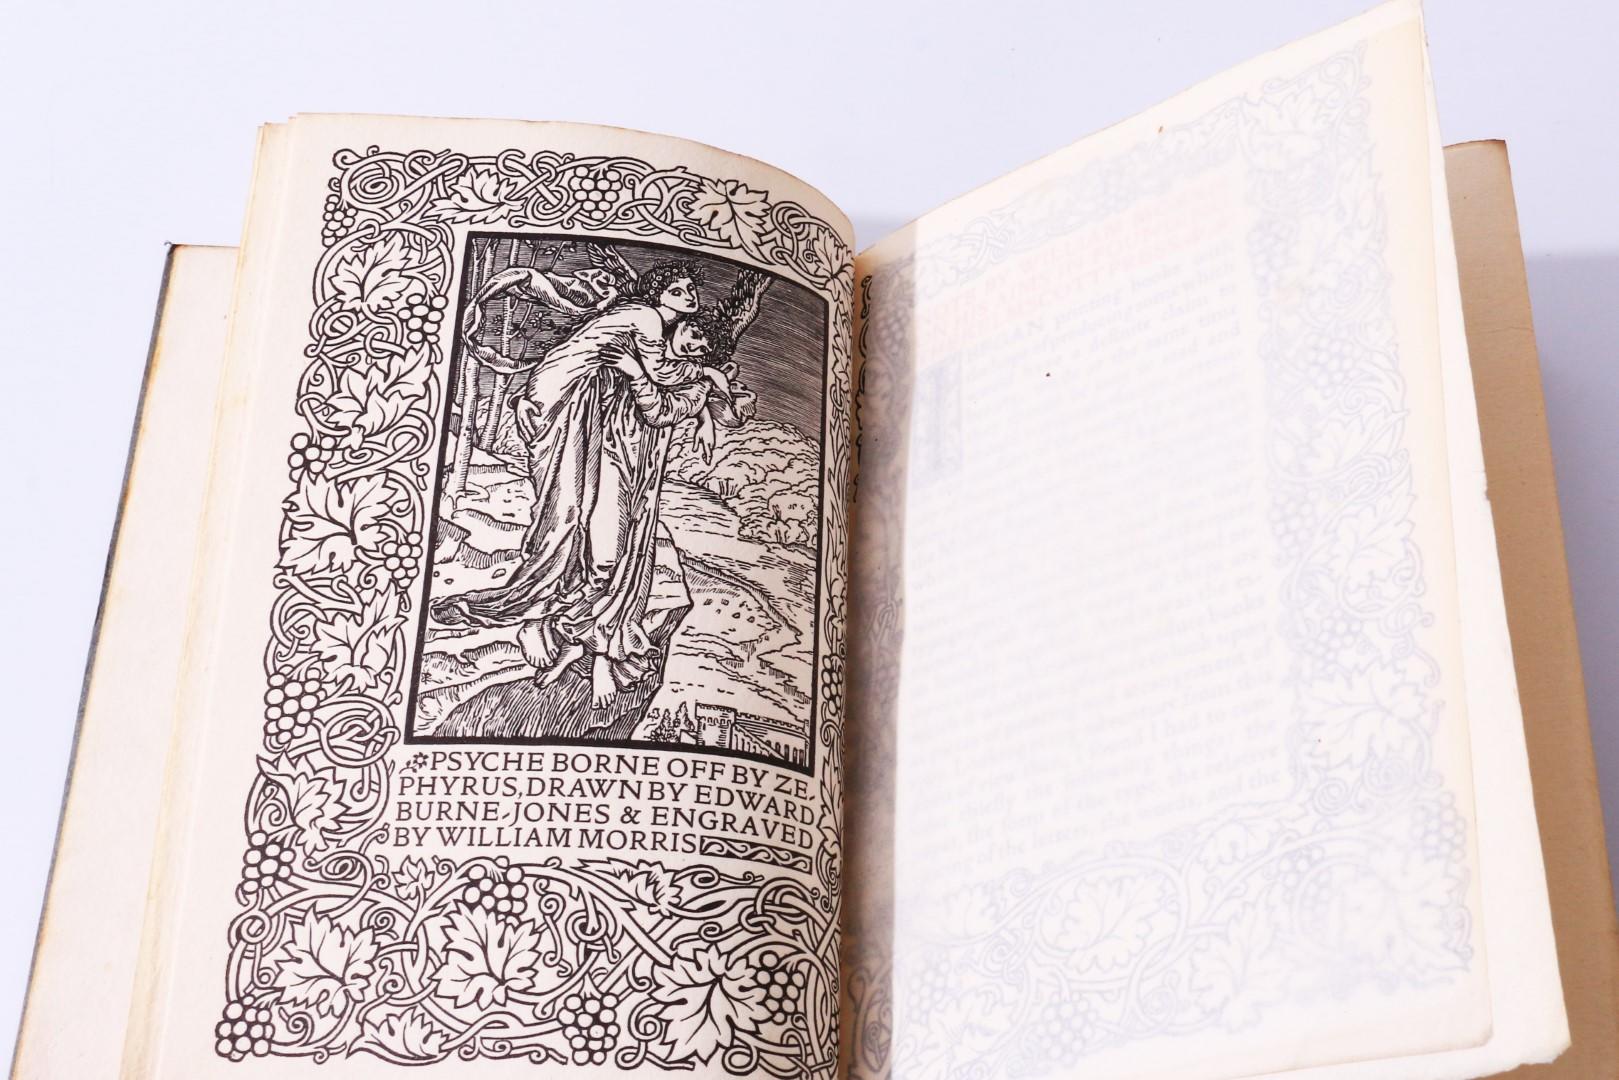 William Morris - A Note by William Morris on his Aims in Founding the Kelmscott Press, Together with a Short Description of the Press by S.C. Cockerell, & an Annotated List of the Books Printed Thereat. - Kelmscott Press, 1898, Limited Edition.